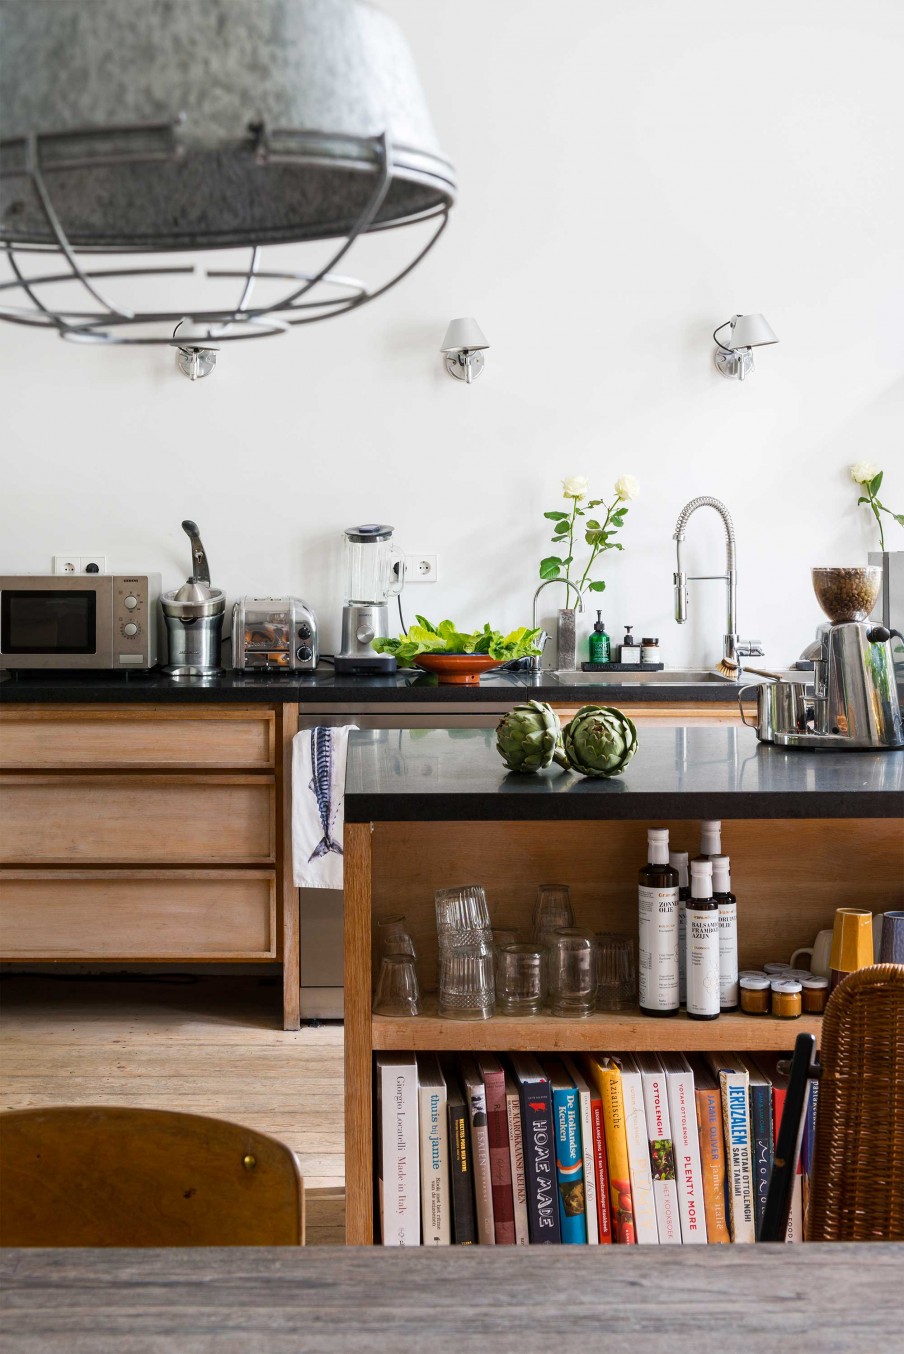 The kitchen features sleek black surfaces, wooden cabinets and floor, it's filled with light and not as whimsy as other areas. The kitchen island features some storage space.